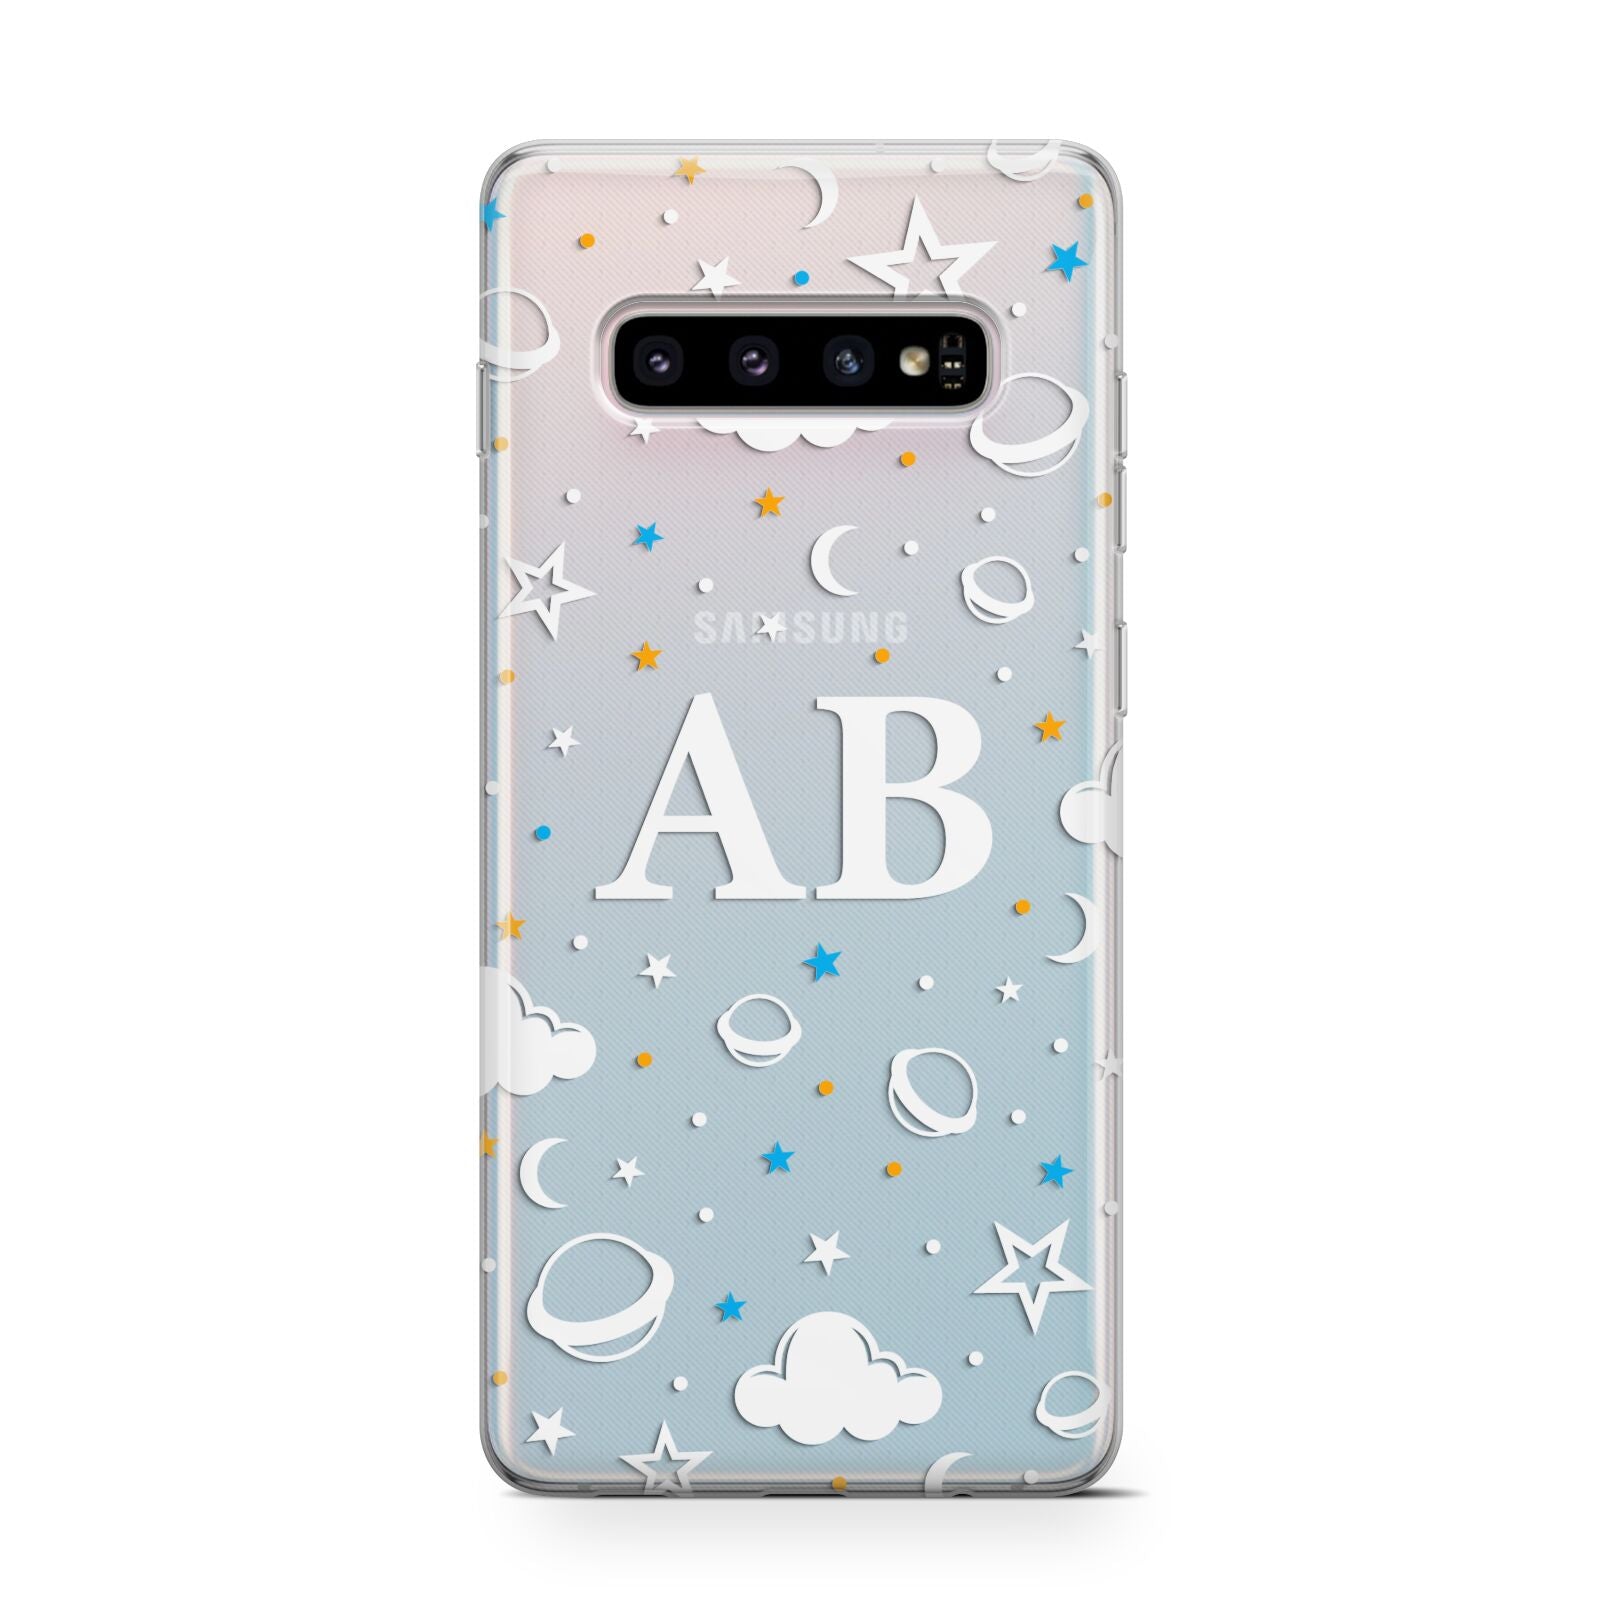 Astronomical Initials Samsung Galaxy S10 Case